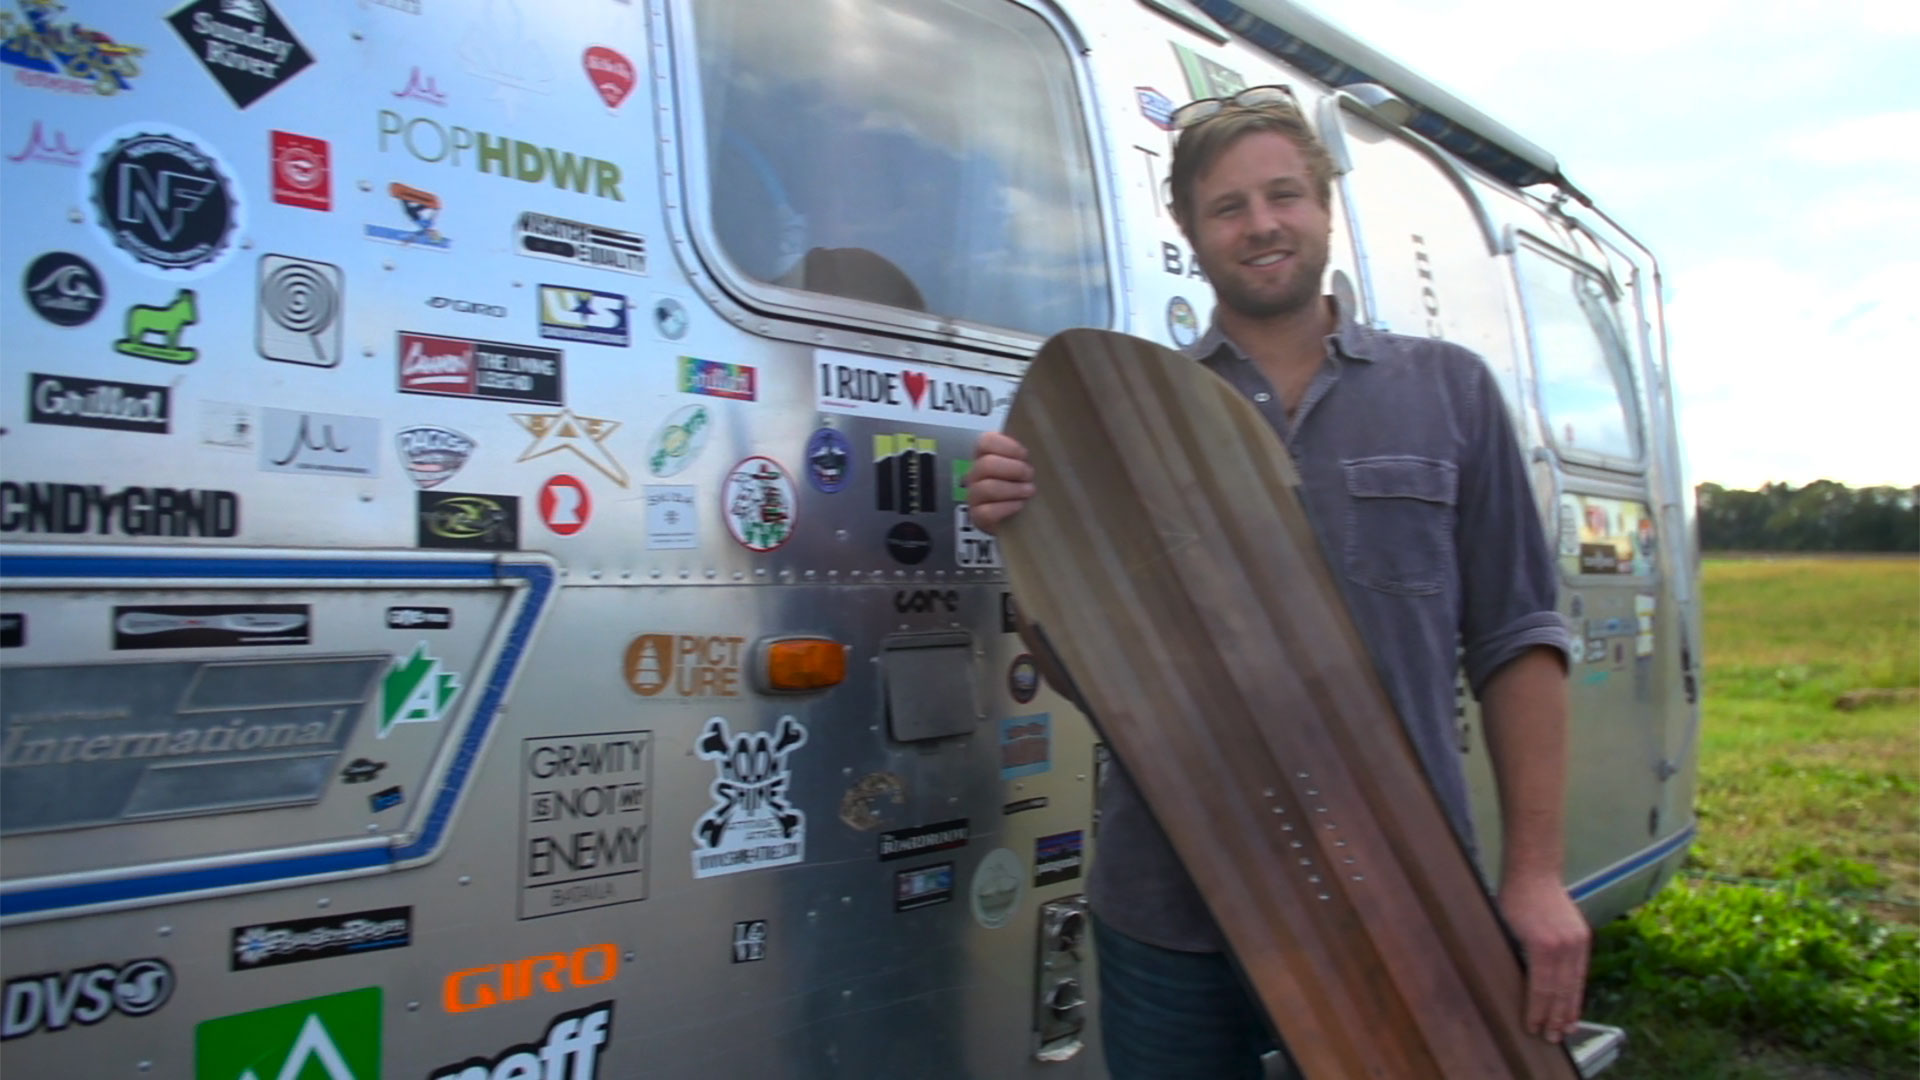 Man holding a snowboard standing in front of an airstream trailer covered in decals